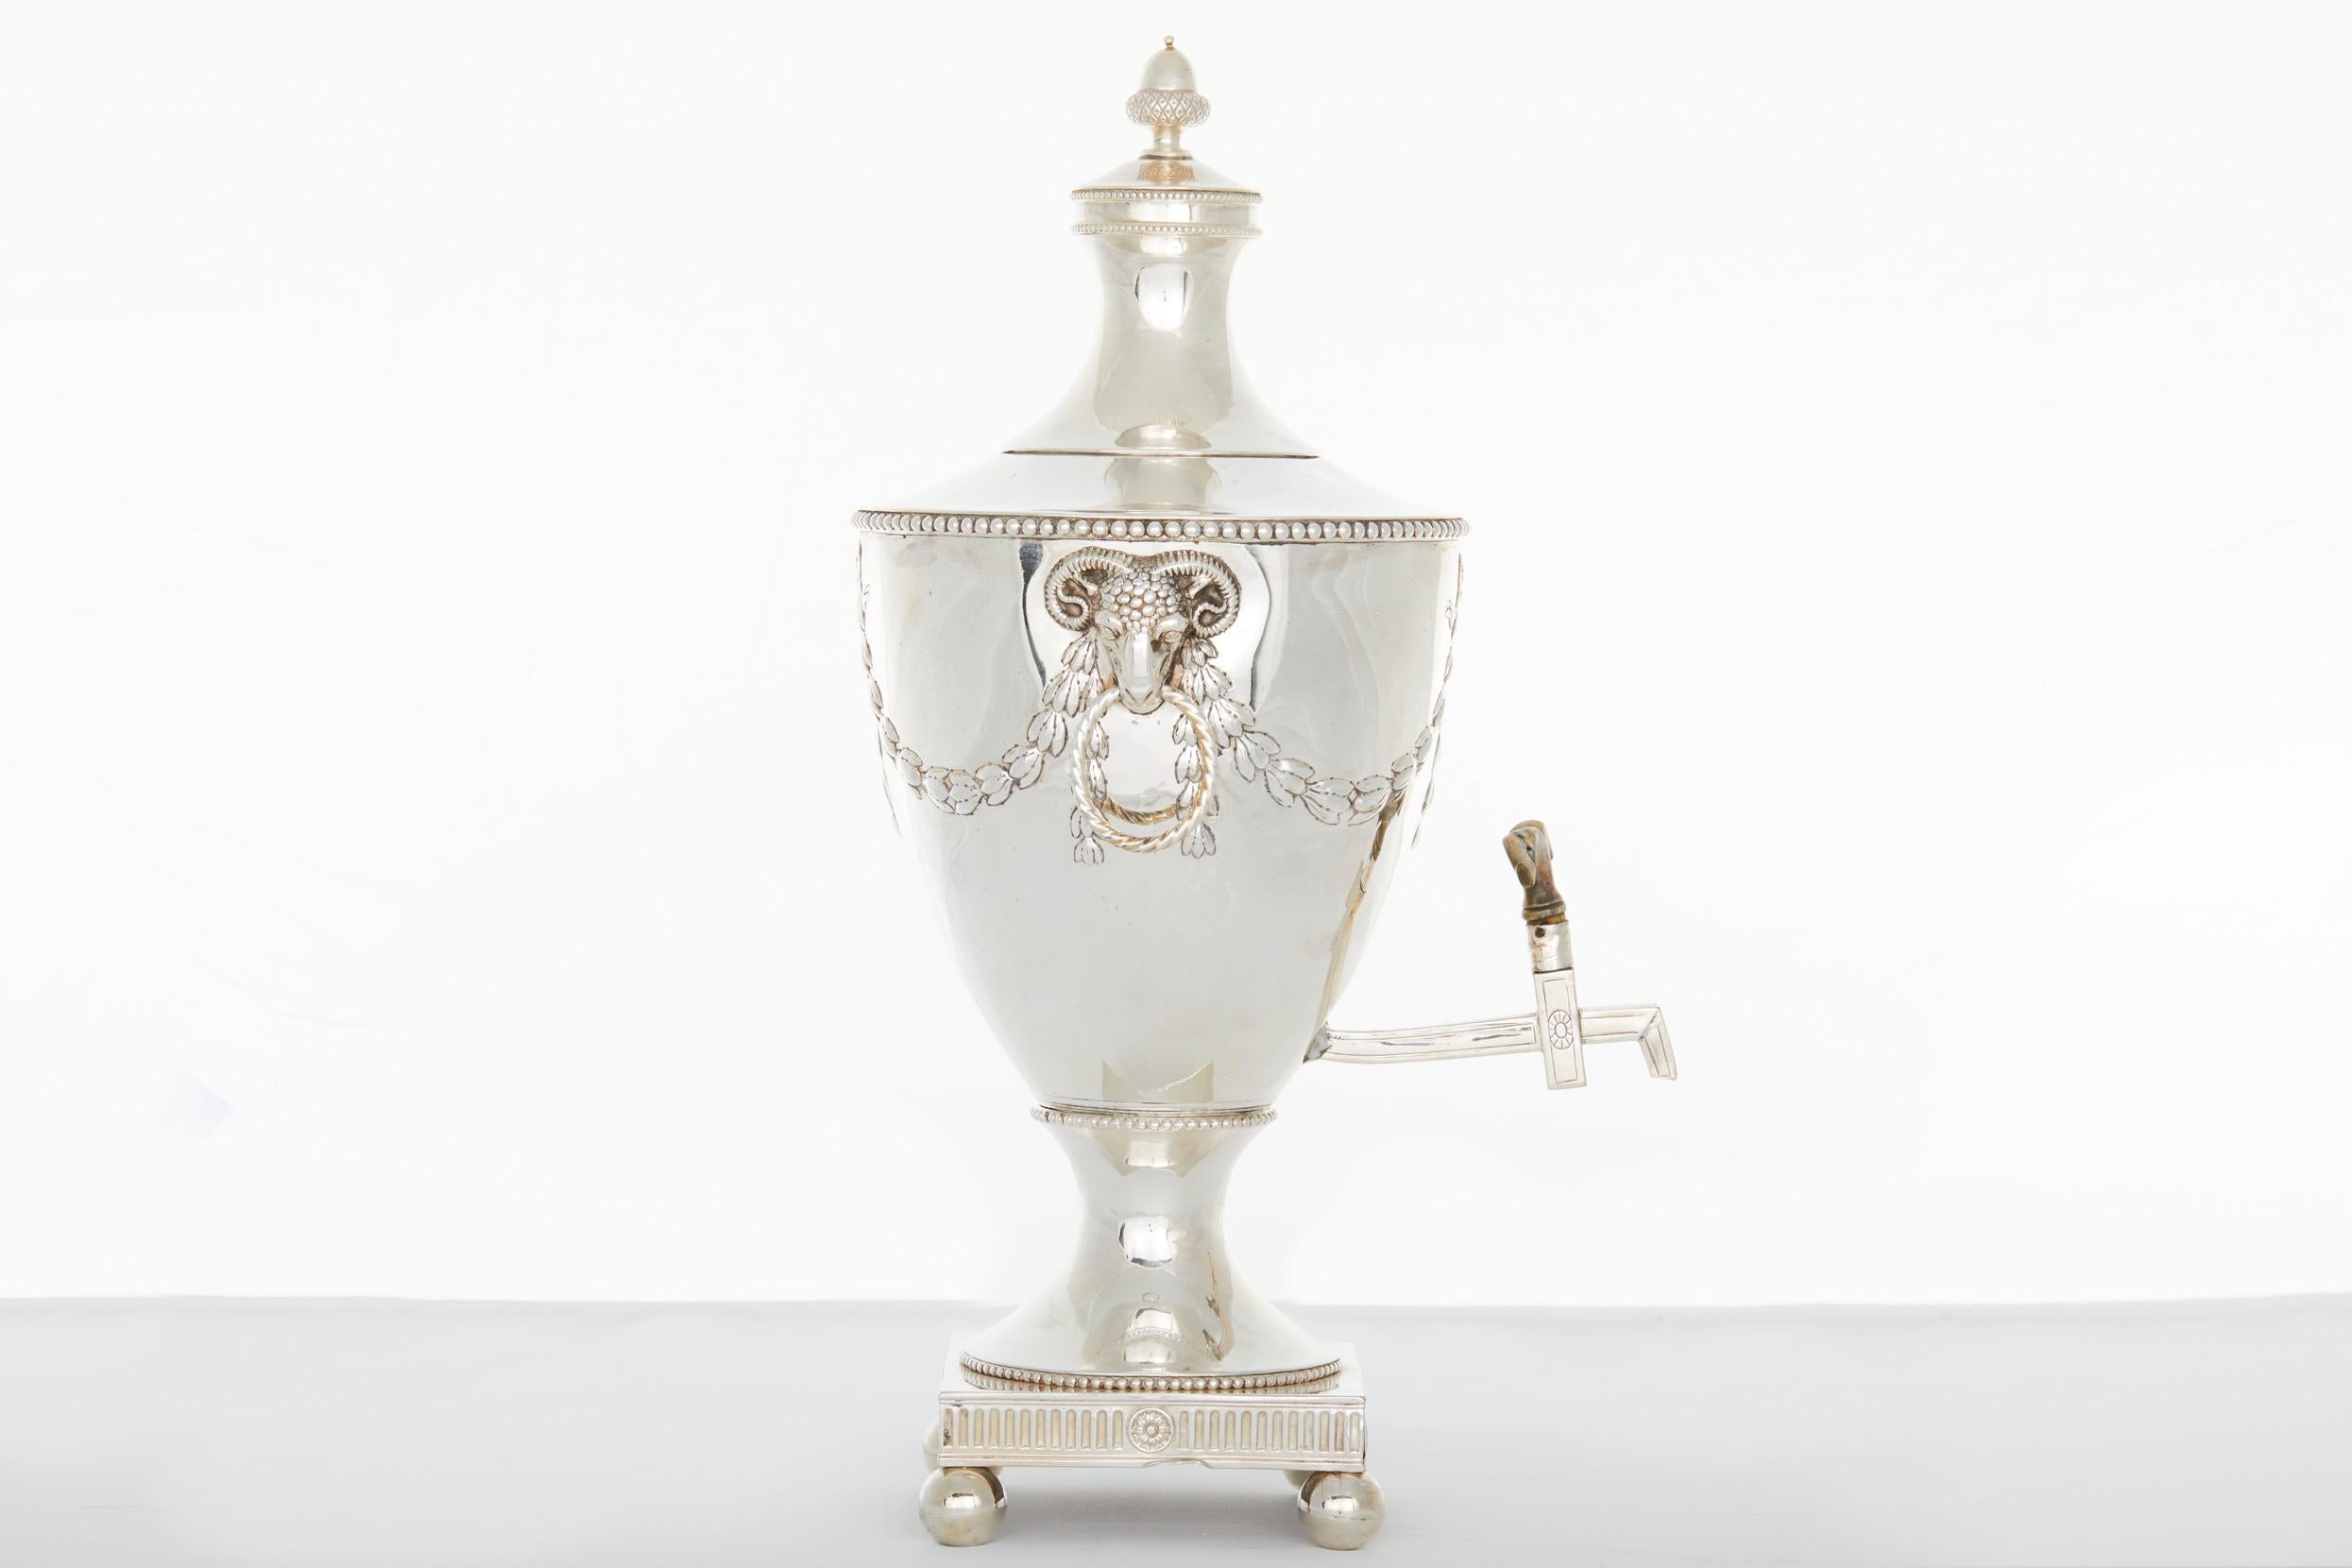 Mid 19th century English silver plated samovar / tea or coffee urn with Ram detail side handles and finial lid on square footed base . The samovar / tea urn is in good antique condition. Minor wear consistent with age / use. Minor dent on the body /